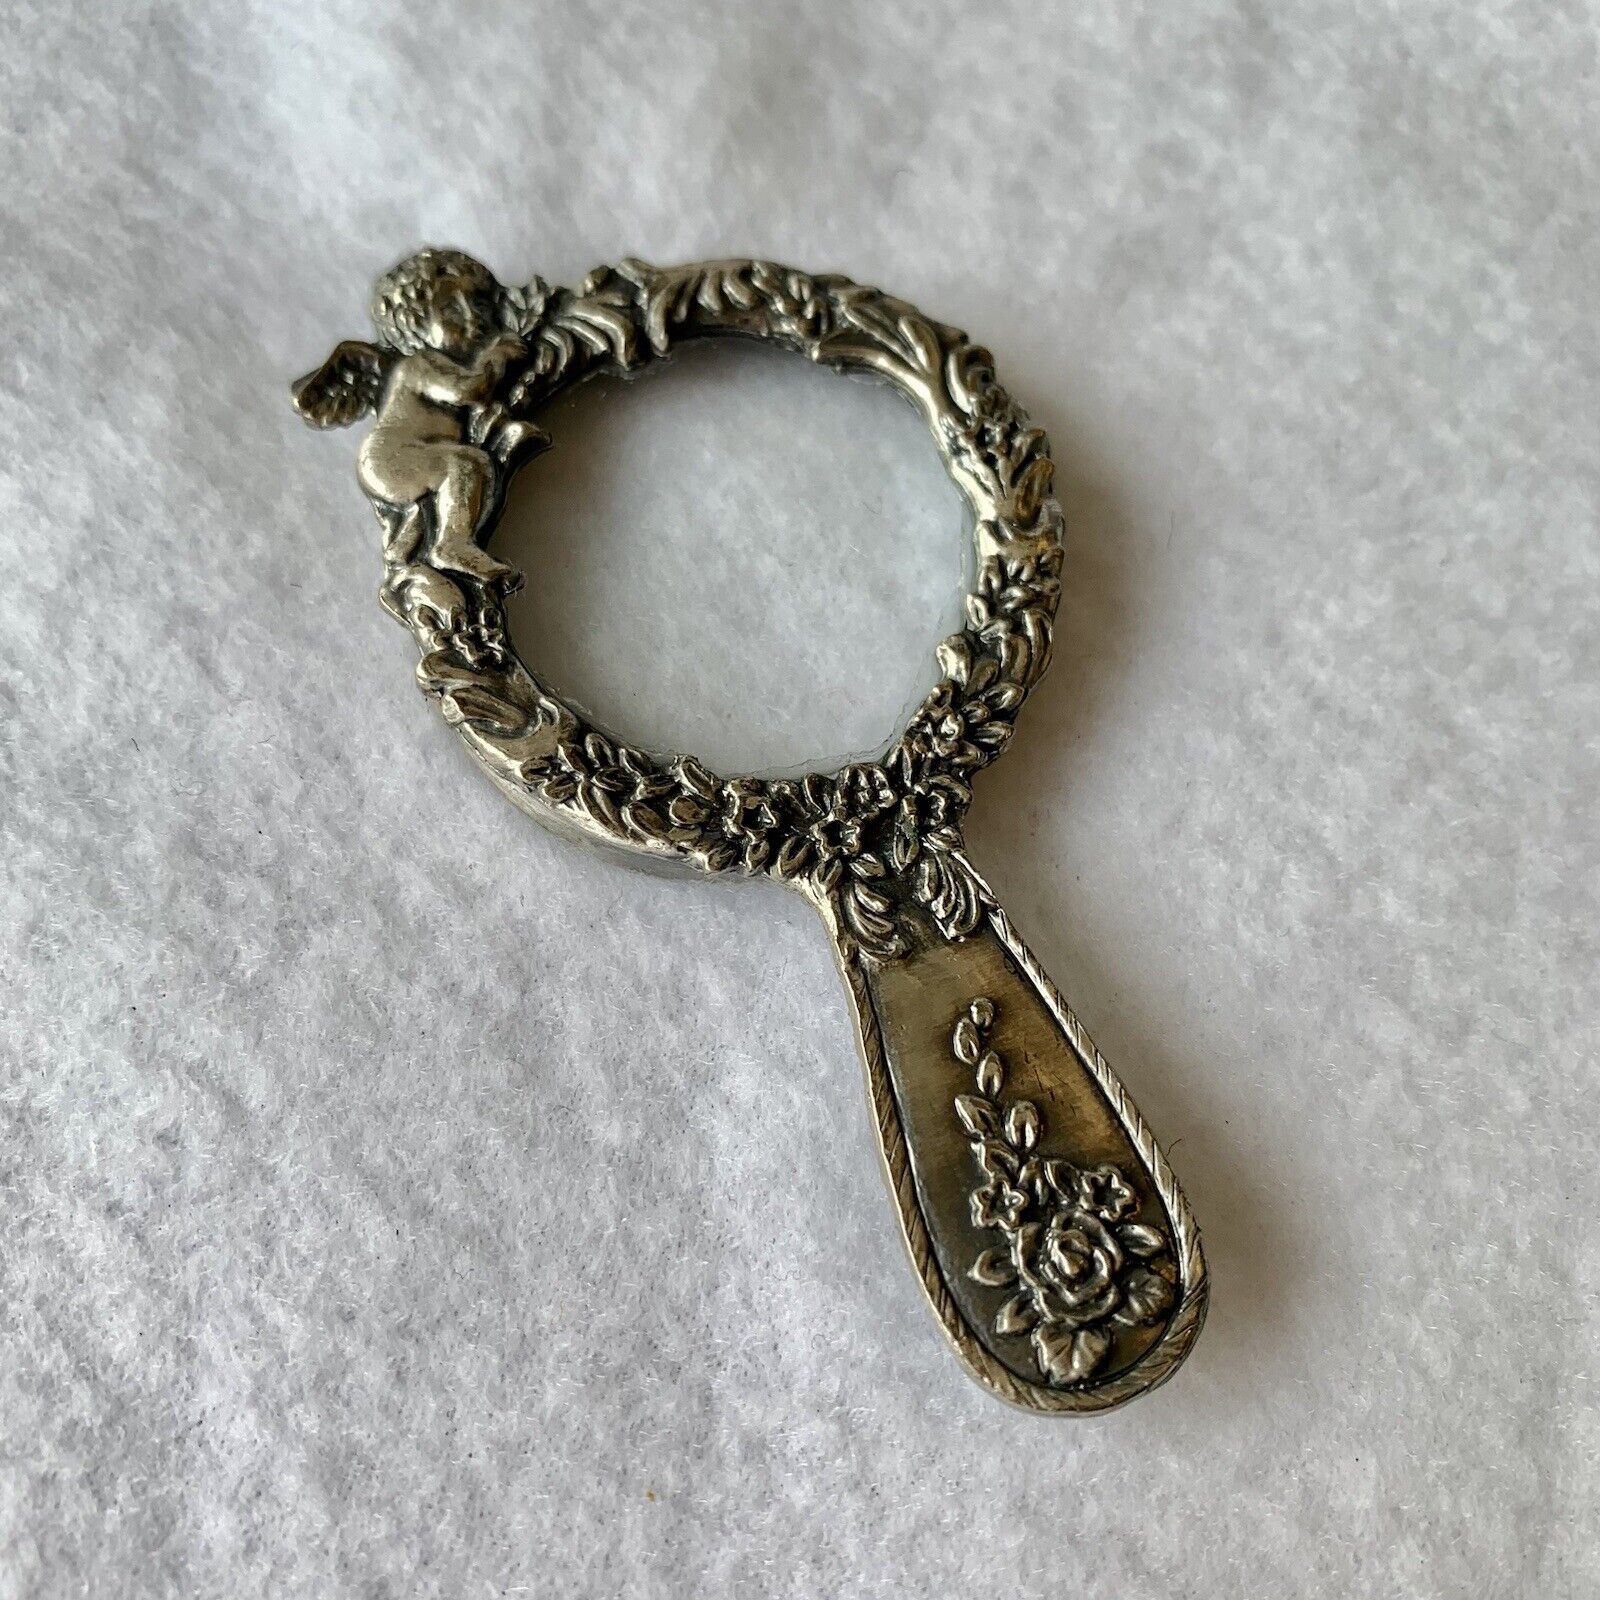 Ganz Miniature Magnifying Glass with Cherub and Flowers, Delicate Collectible